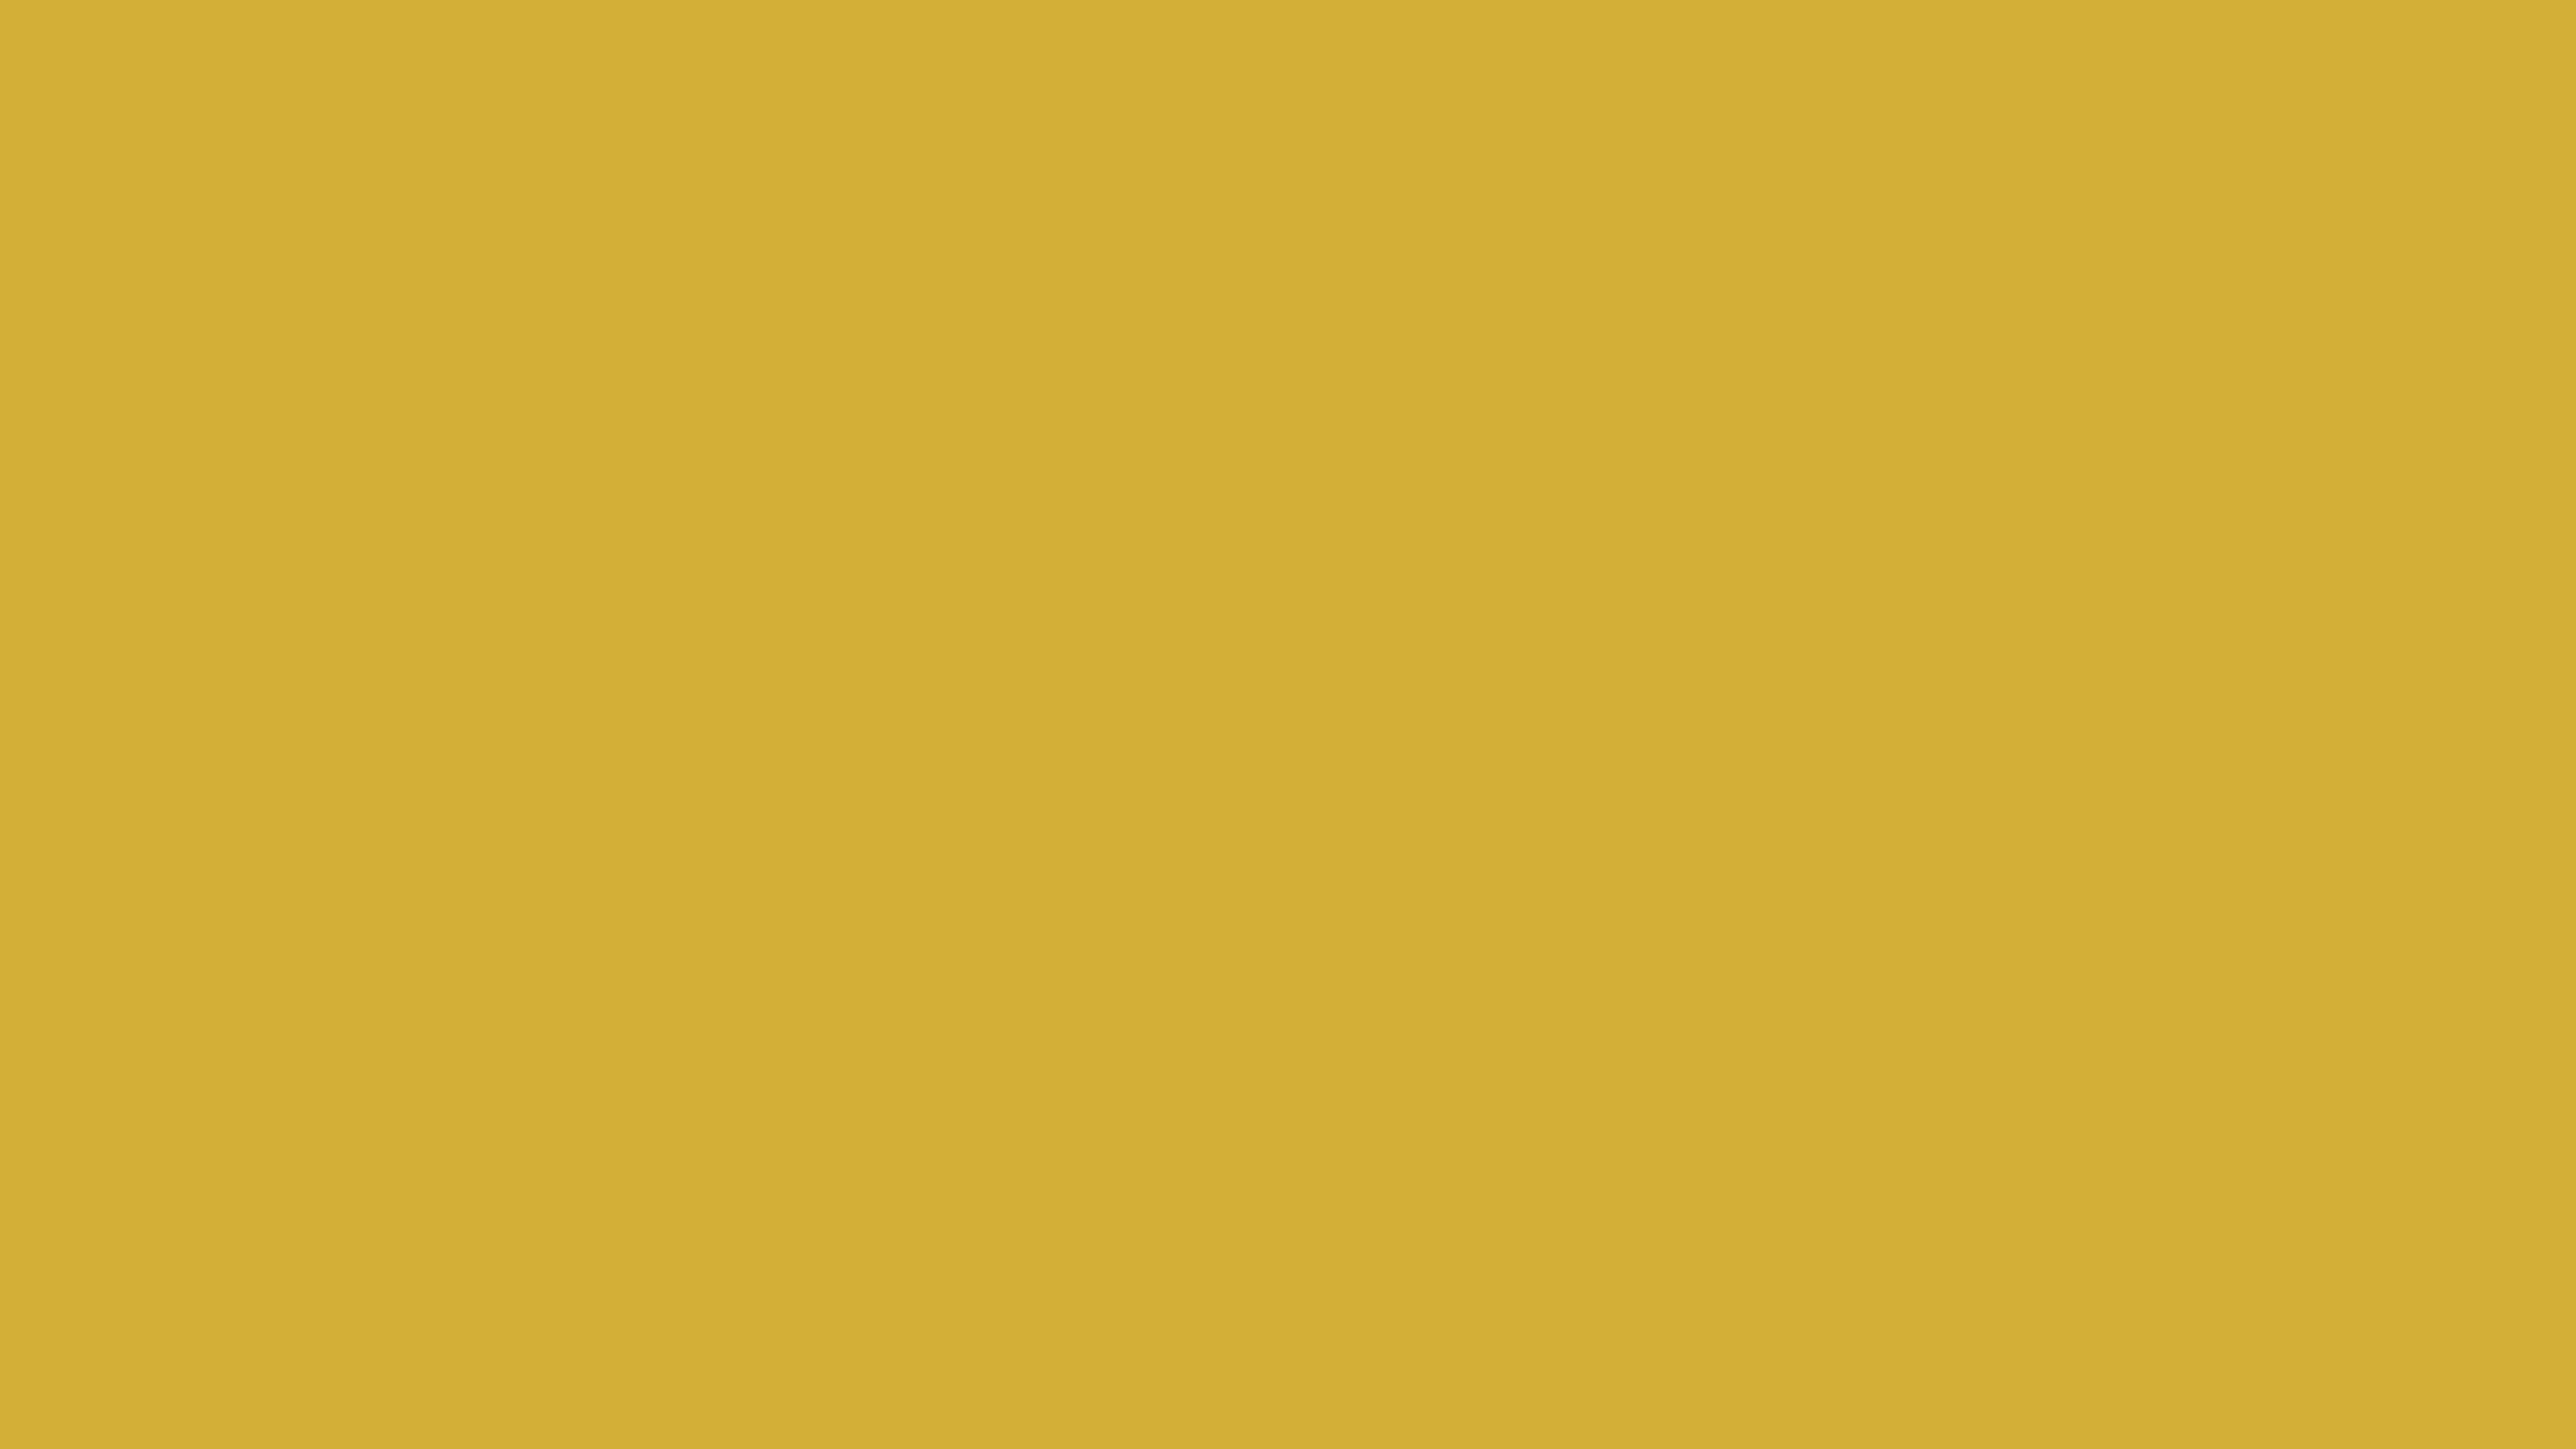 7680x4320 Gold Metallic Solid Color Background